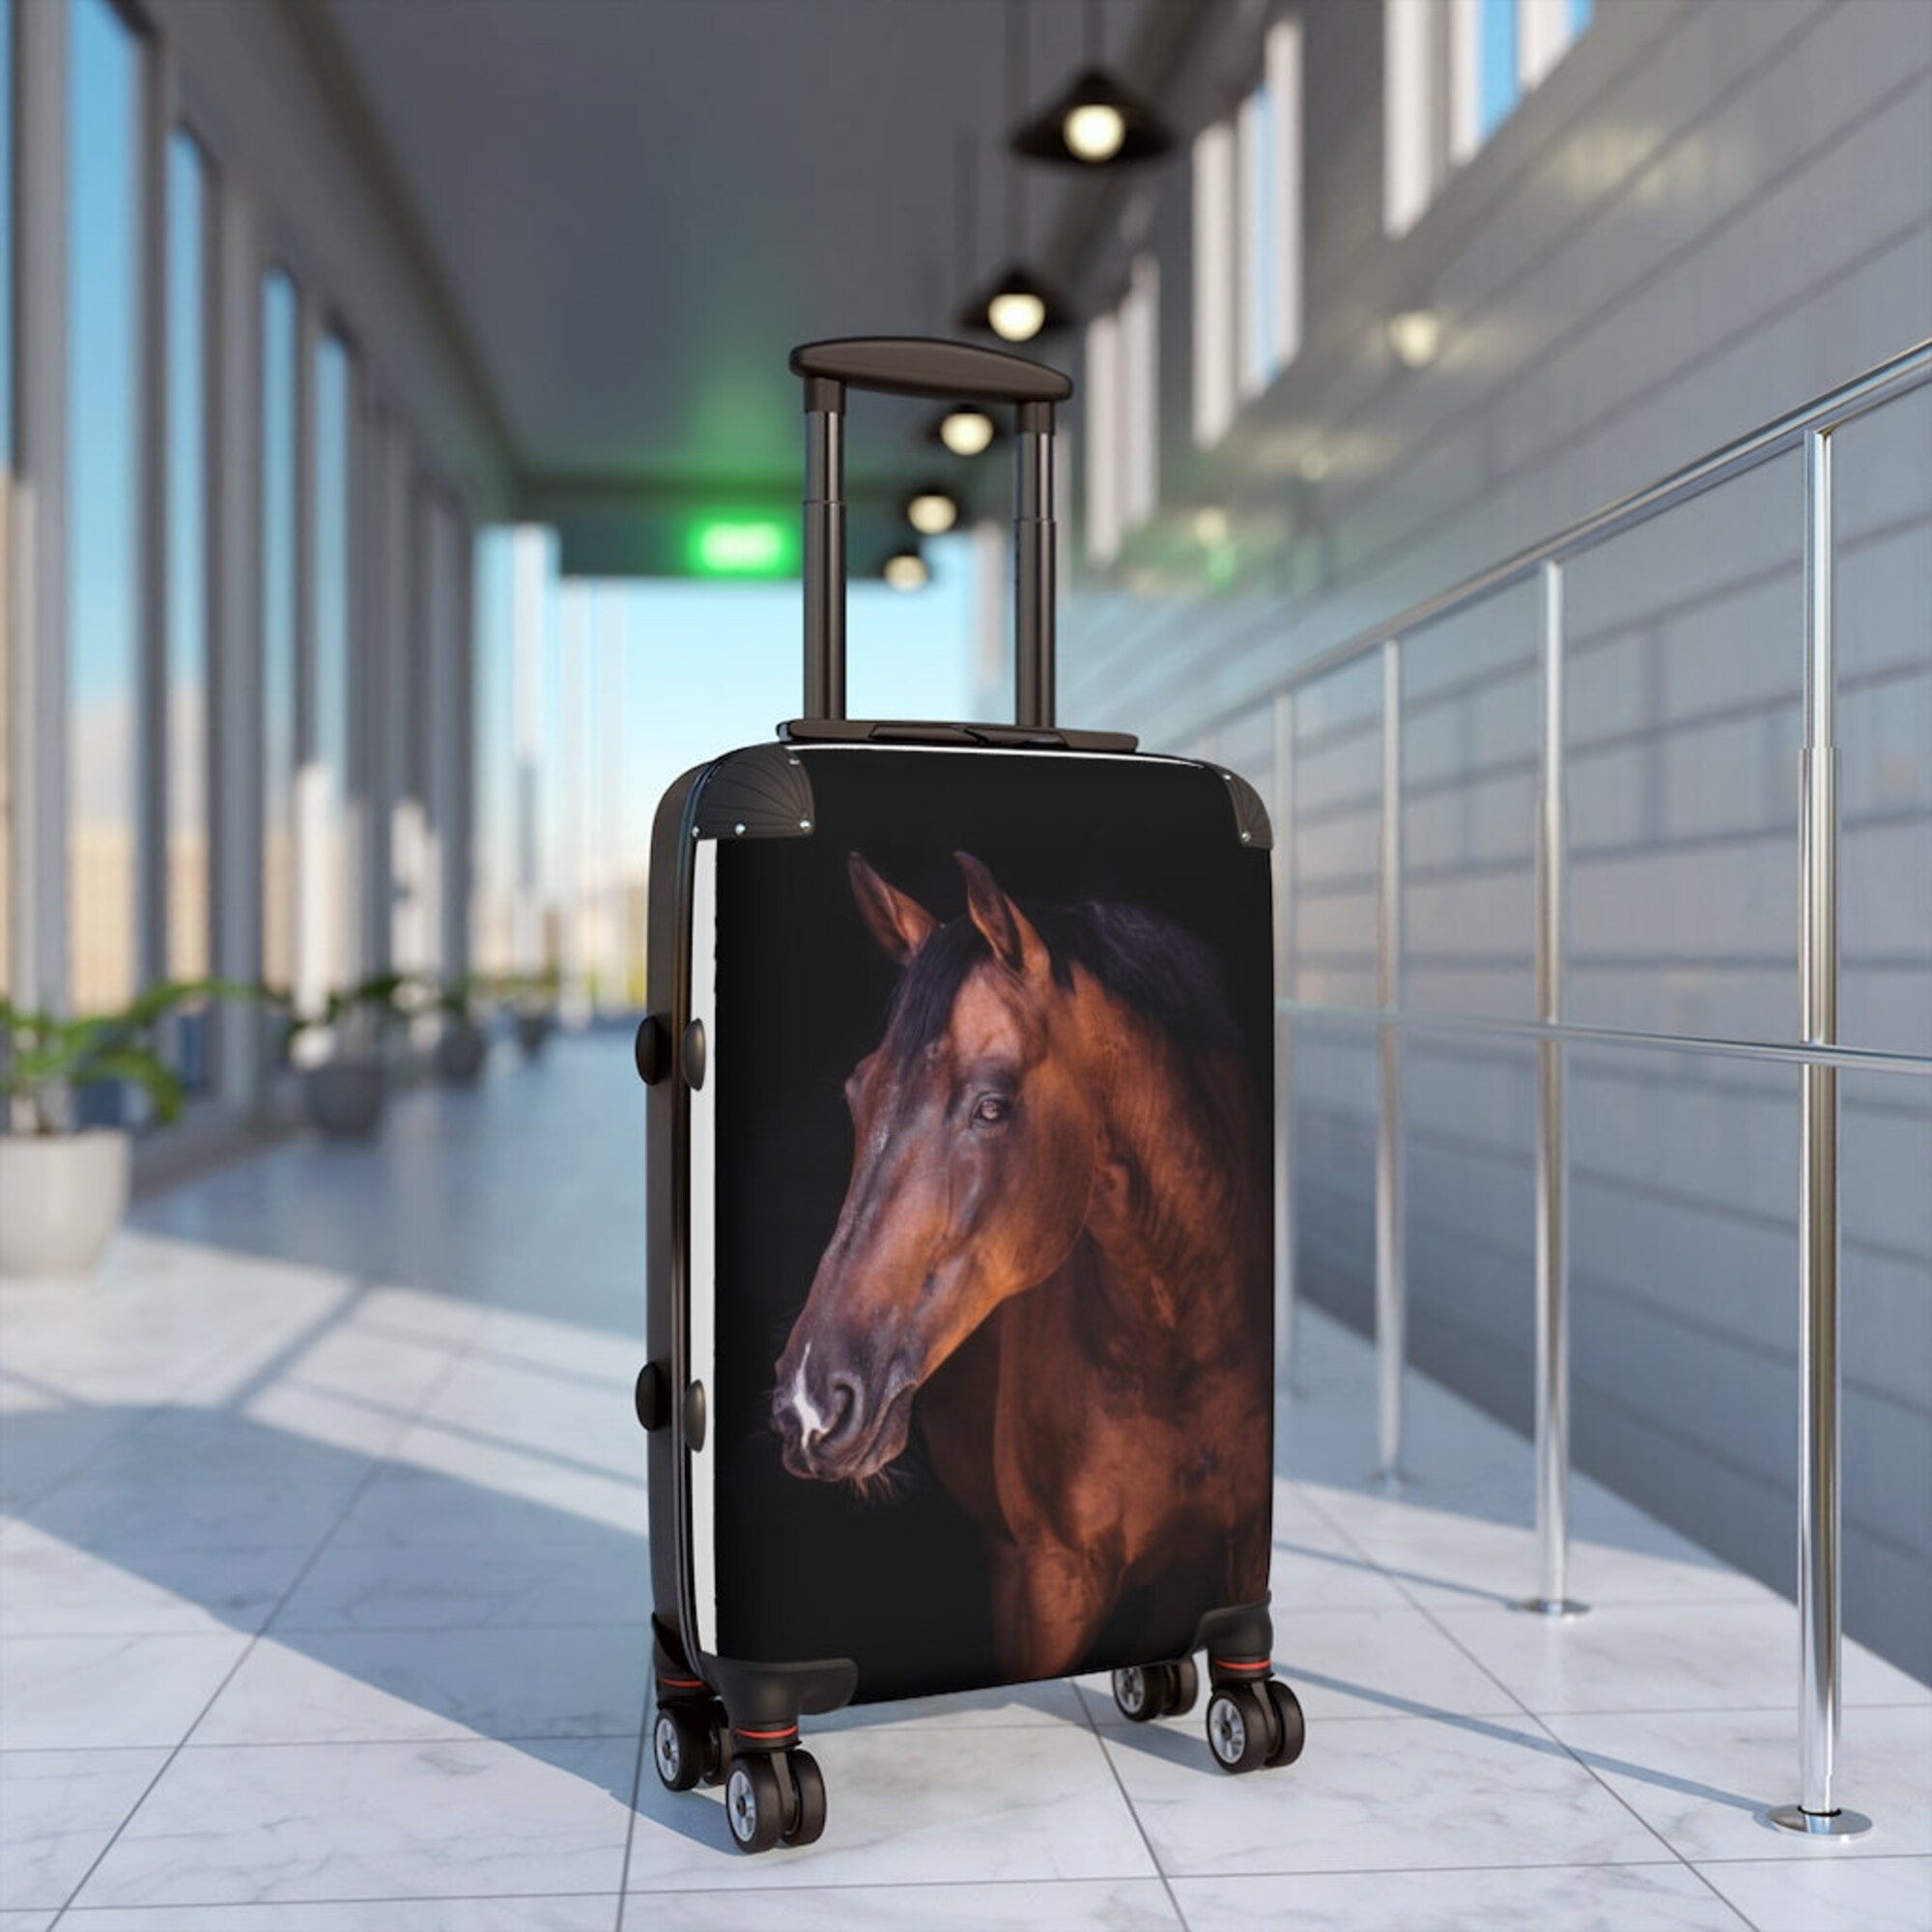 Discover Horse Equestrian Thoroughbred Carryon Luggage Cabin Suitcase, Hardcase Luggage